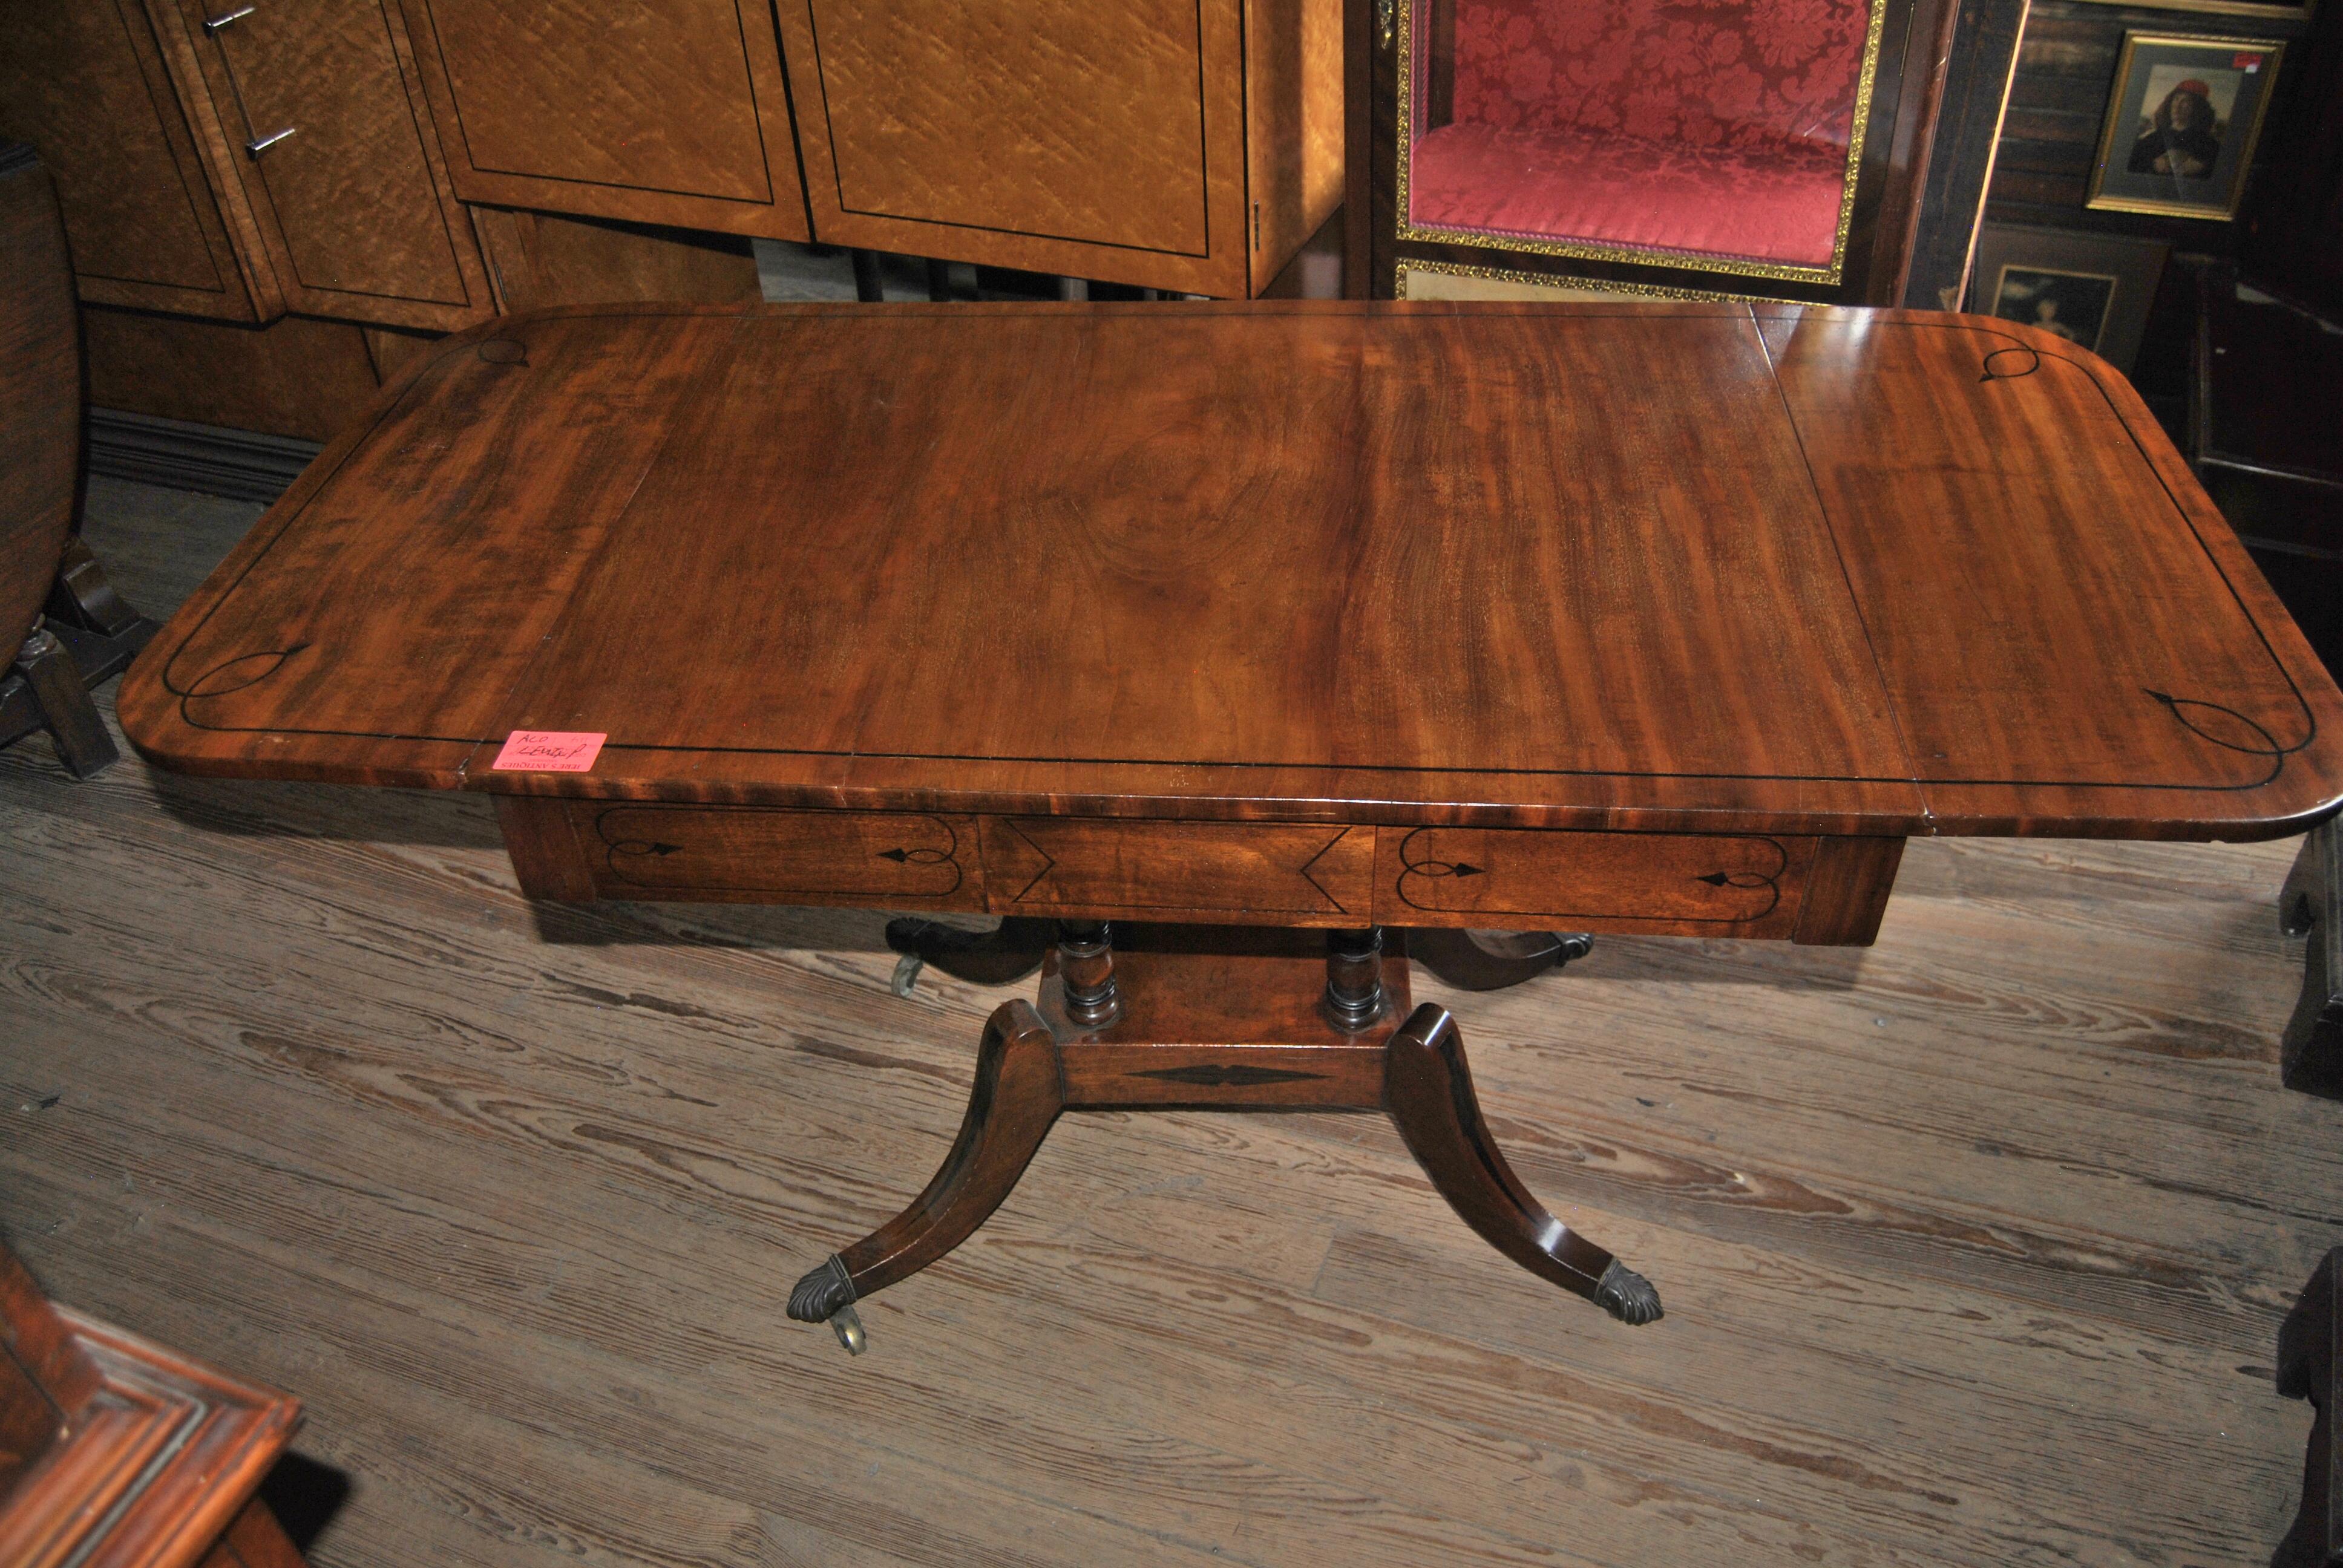 This is a solid mahogany drop leaf table made in England, circa 1825. The top, both leaves, the ring turnings on the pedestals, the platform base, the frame of the table and all 4 legs are inlayed with Ebony. There are 2 drawers to the front of the